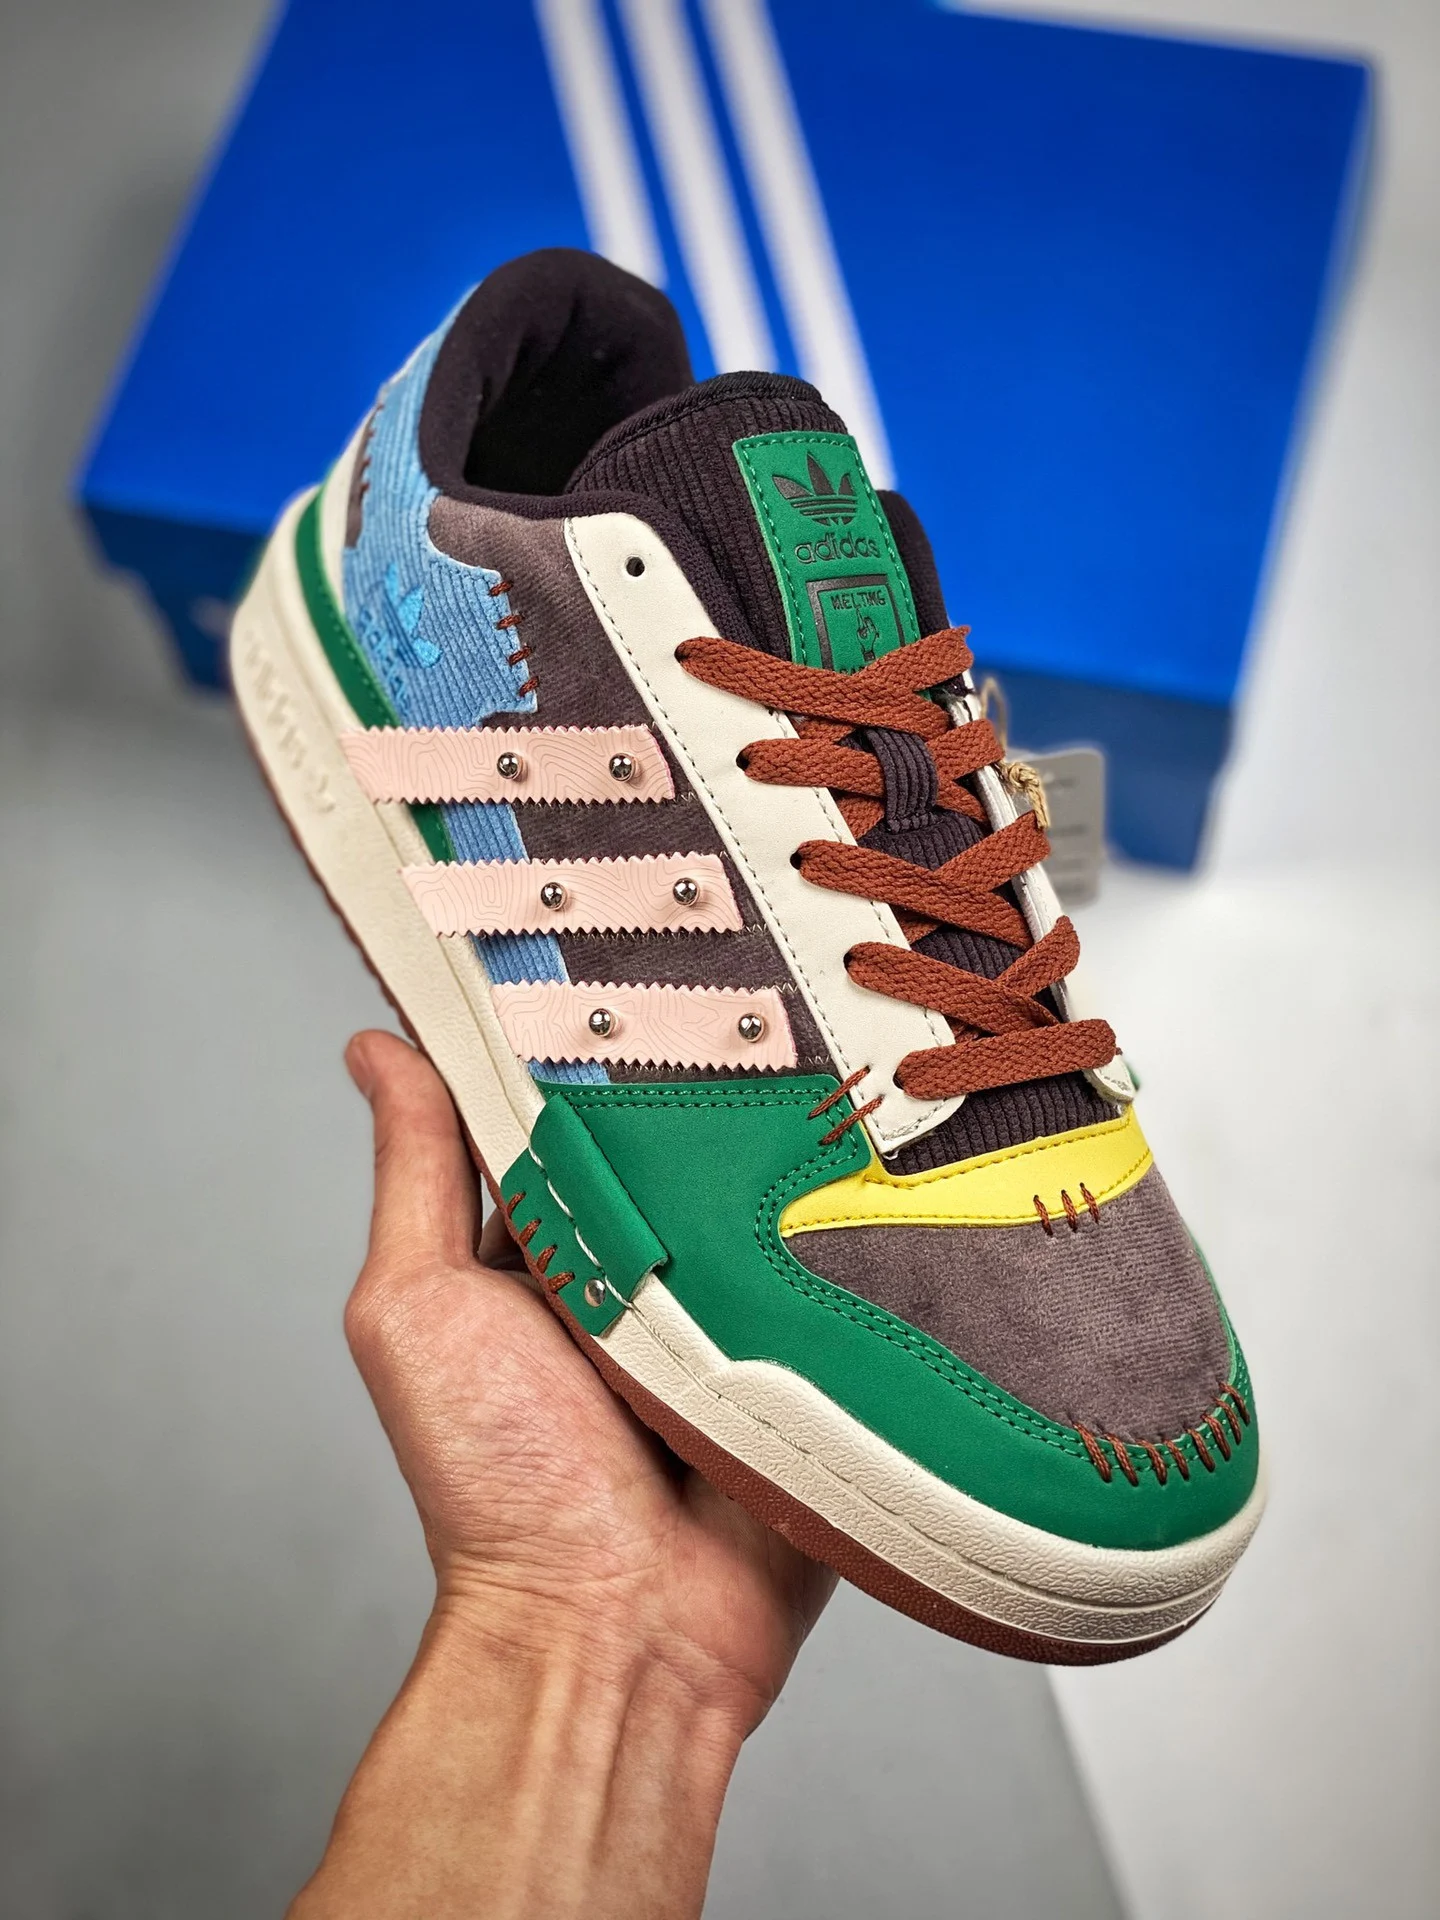 Melting Sadness x Adidas Forum Low Blue Green-Brown For Sale